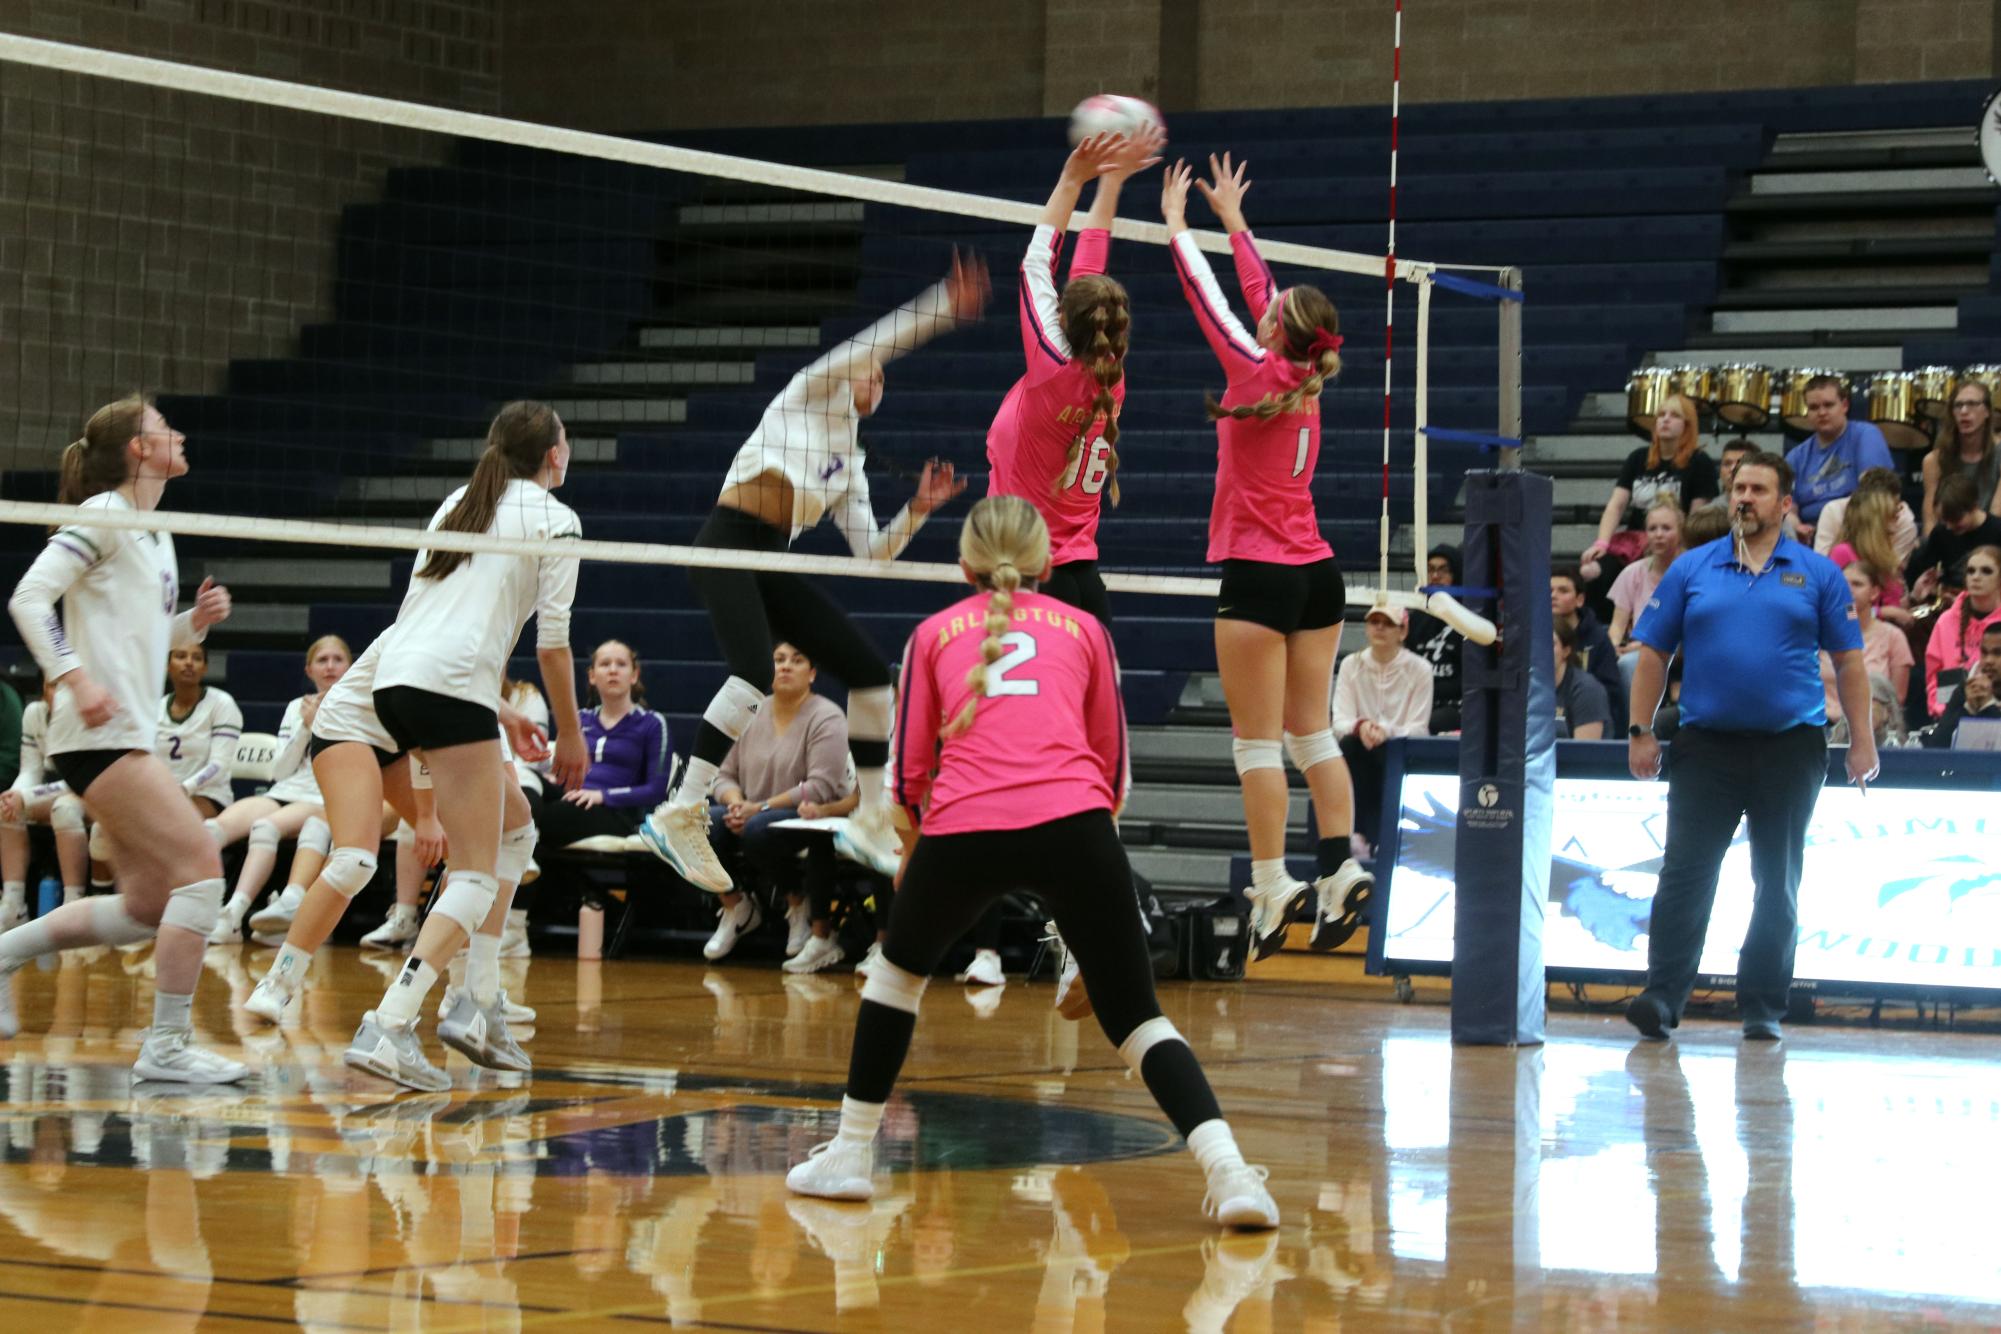 At the net blocking a hit is Emma Armes (‘24) and Sophie Graham (‘25) during the game on  October 17.  Arlington beat Edmonds-Woodway 3-0.Sophie and I both went up to block the hitter while Delanie Theuret is covering in case of the ball hitting off our hands said Armes.